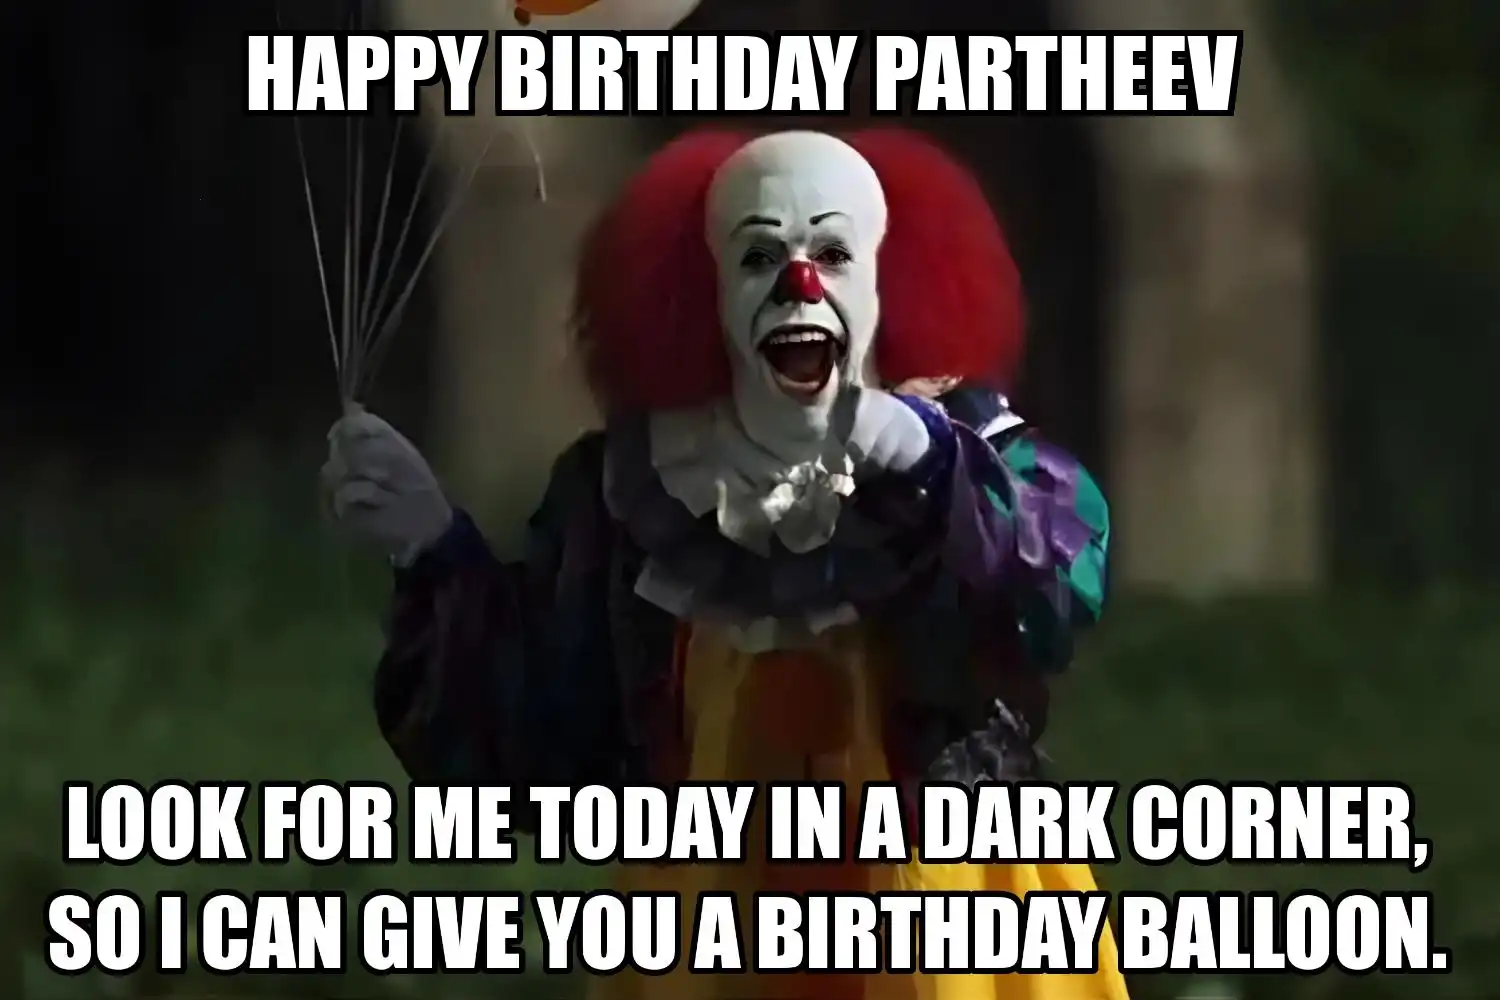 Happy Birthday Partheev I Can Give You A Balloon Meme